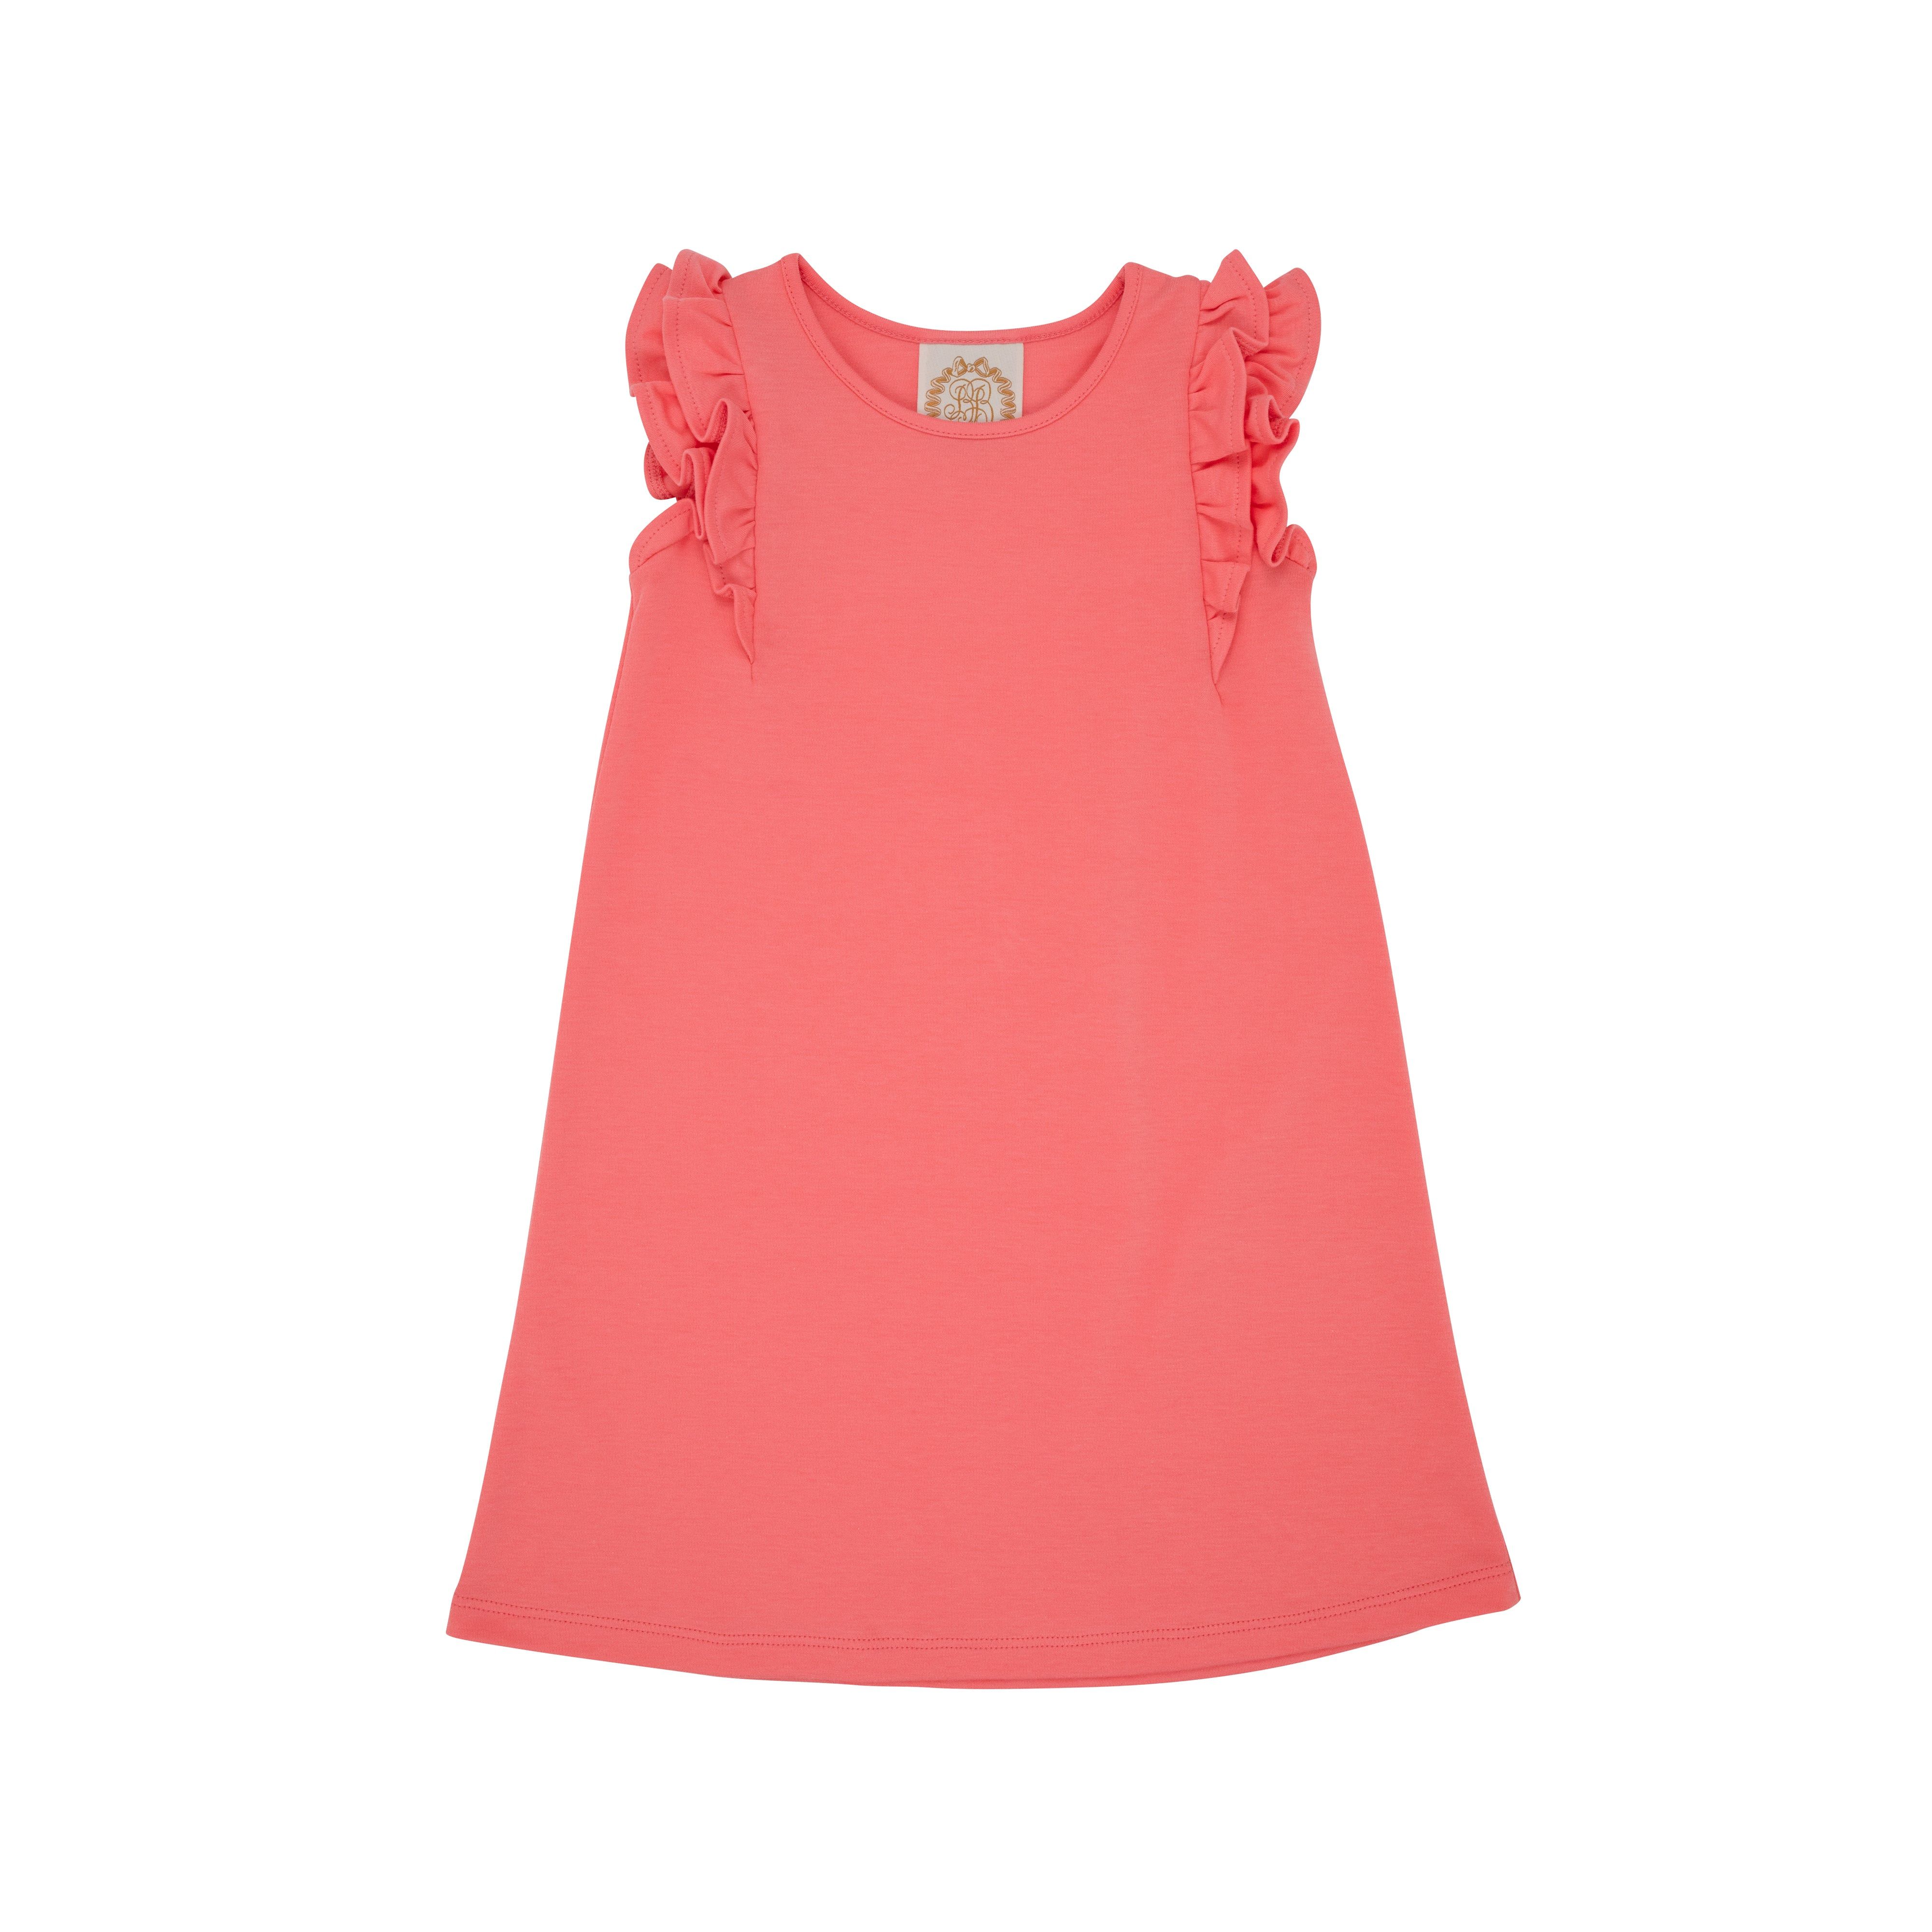 Ruehling Ruffle Dress - Parrot Cay Coral | The Beaufort Bonnet Company